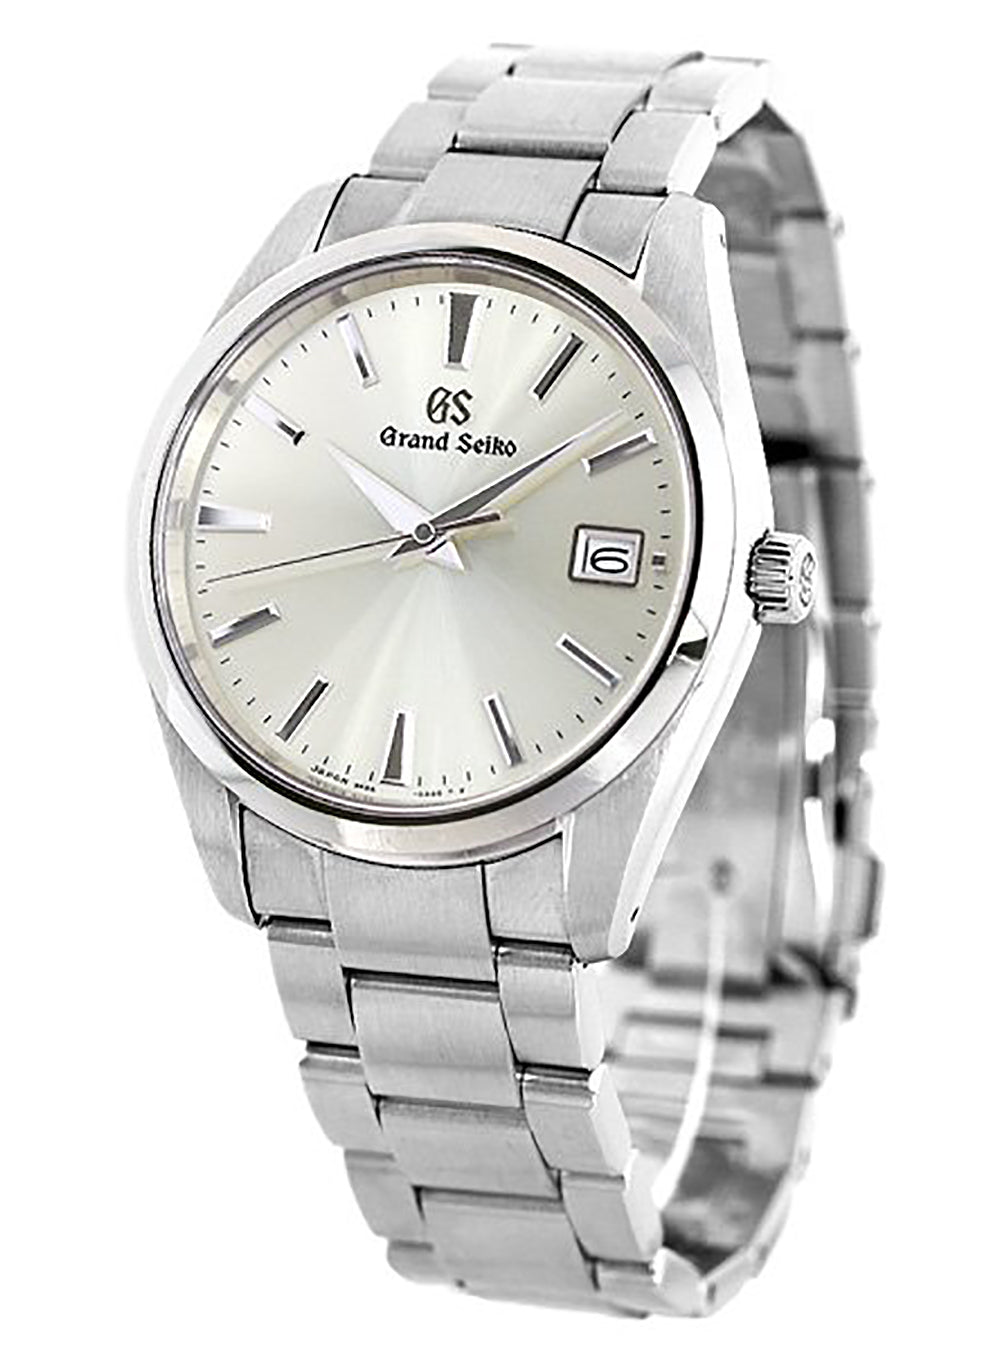 GRAND SEIKO HERITAGE COLLECTION SBGP009 MADE IN JAPAN JDM